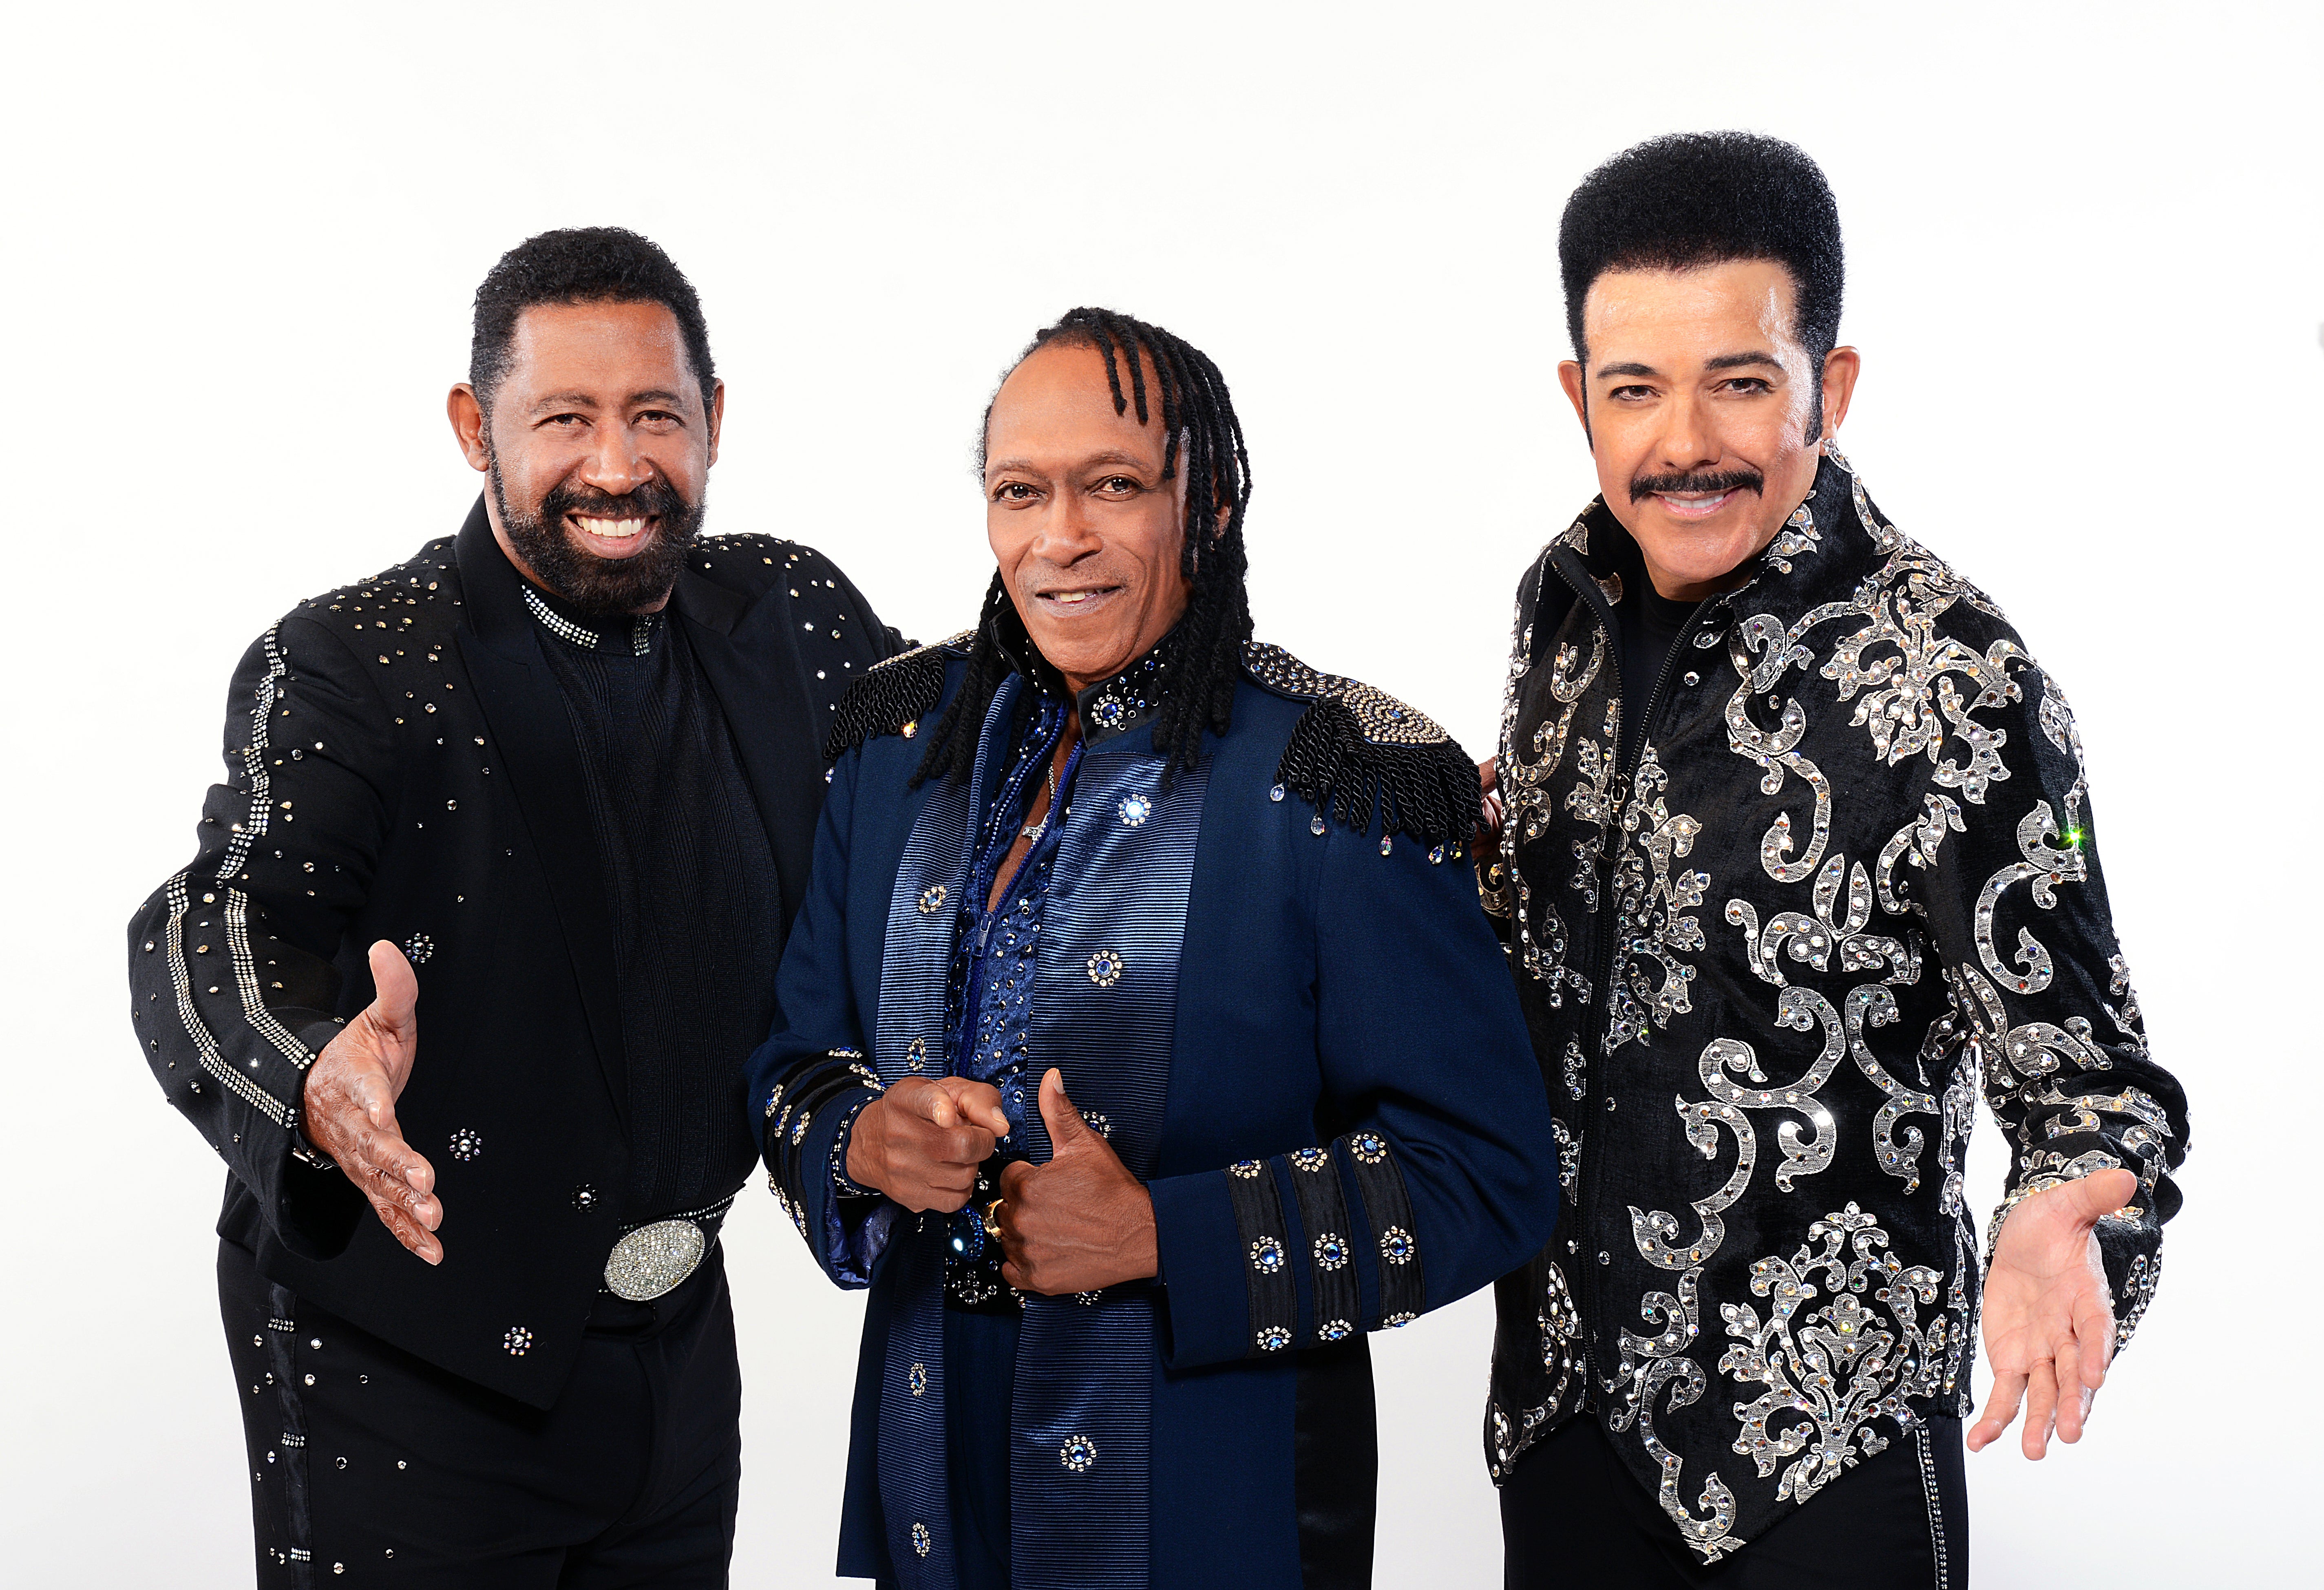 The Commodores at Prairie Band Casino and Resort